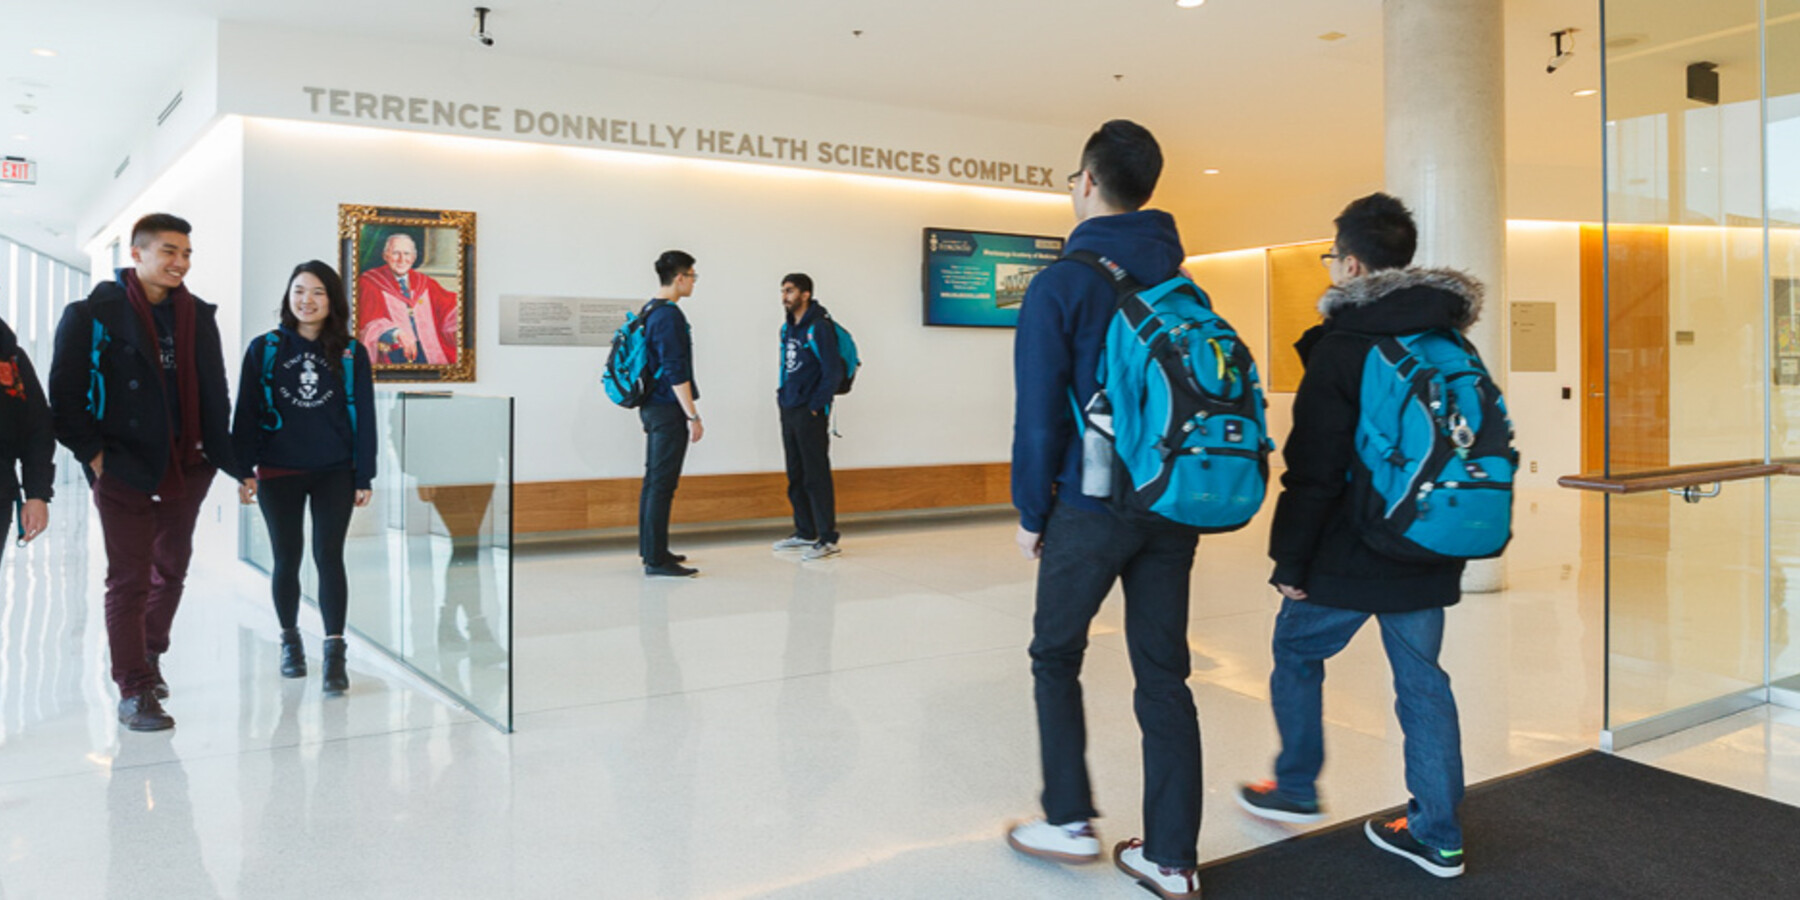 Students walk through the Terrence Donnelly Health Sciences Complex.